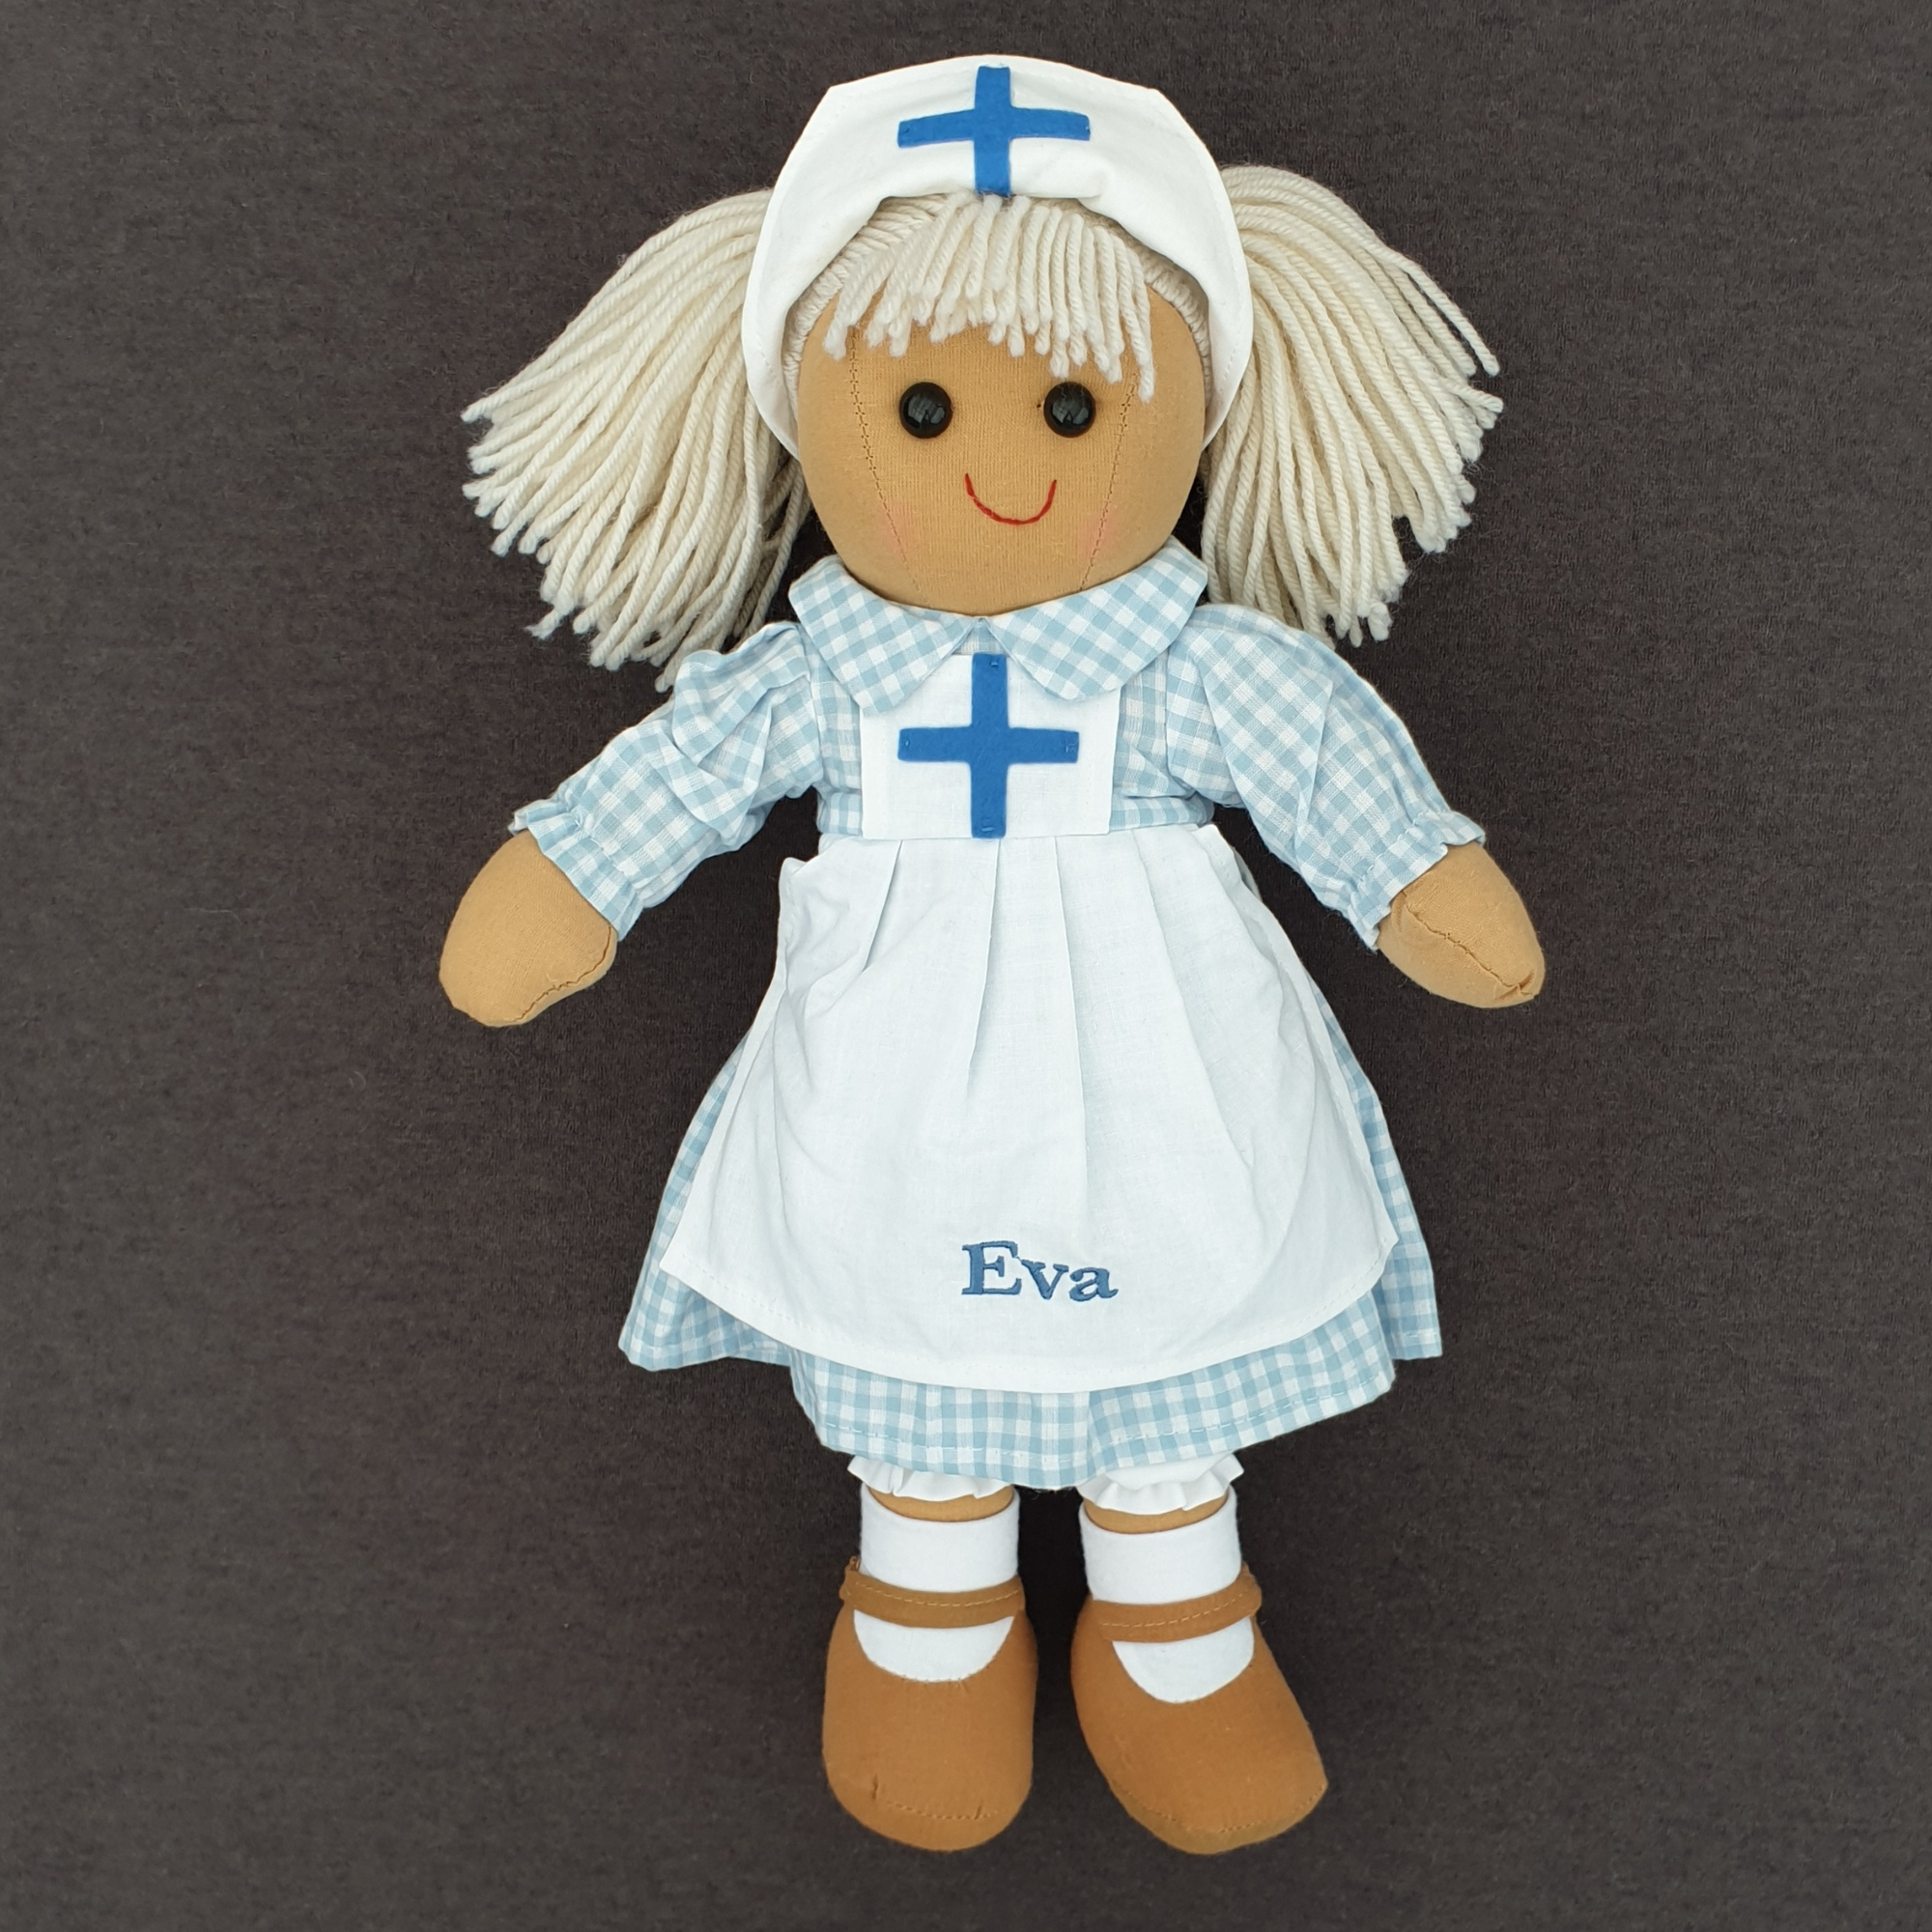 Personalised nurse rag doll. The doll is wearing a blue and white gingham dress with a white apron over the top that can be embroidered with a name of your choice.  She has blonde hair in bunches and a white hat with a blue cross on it.